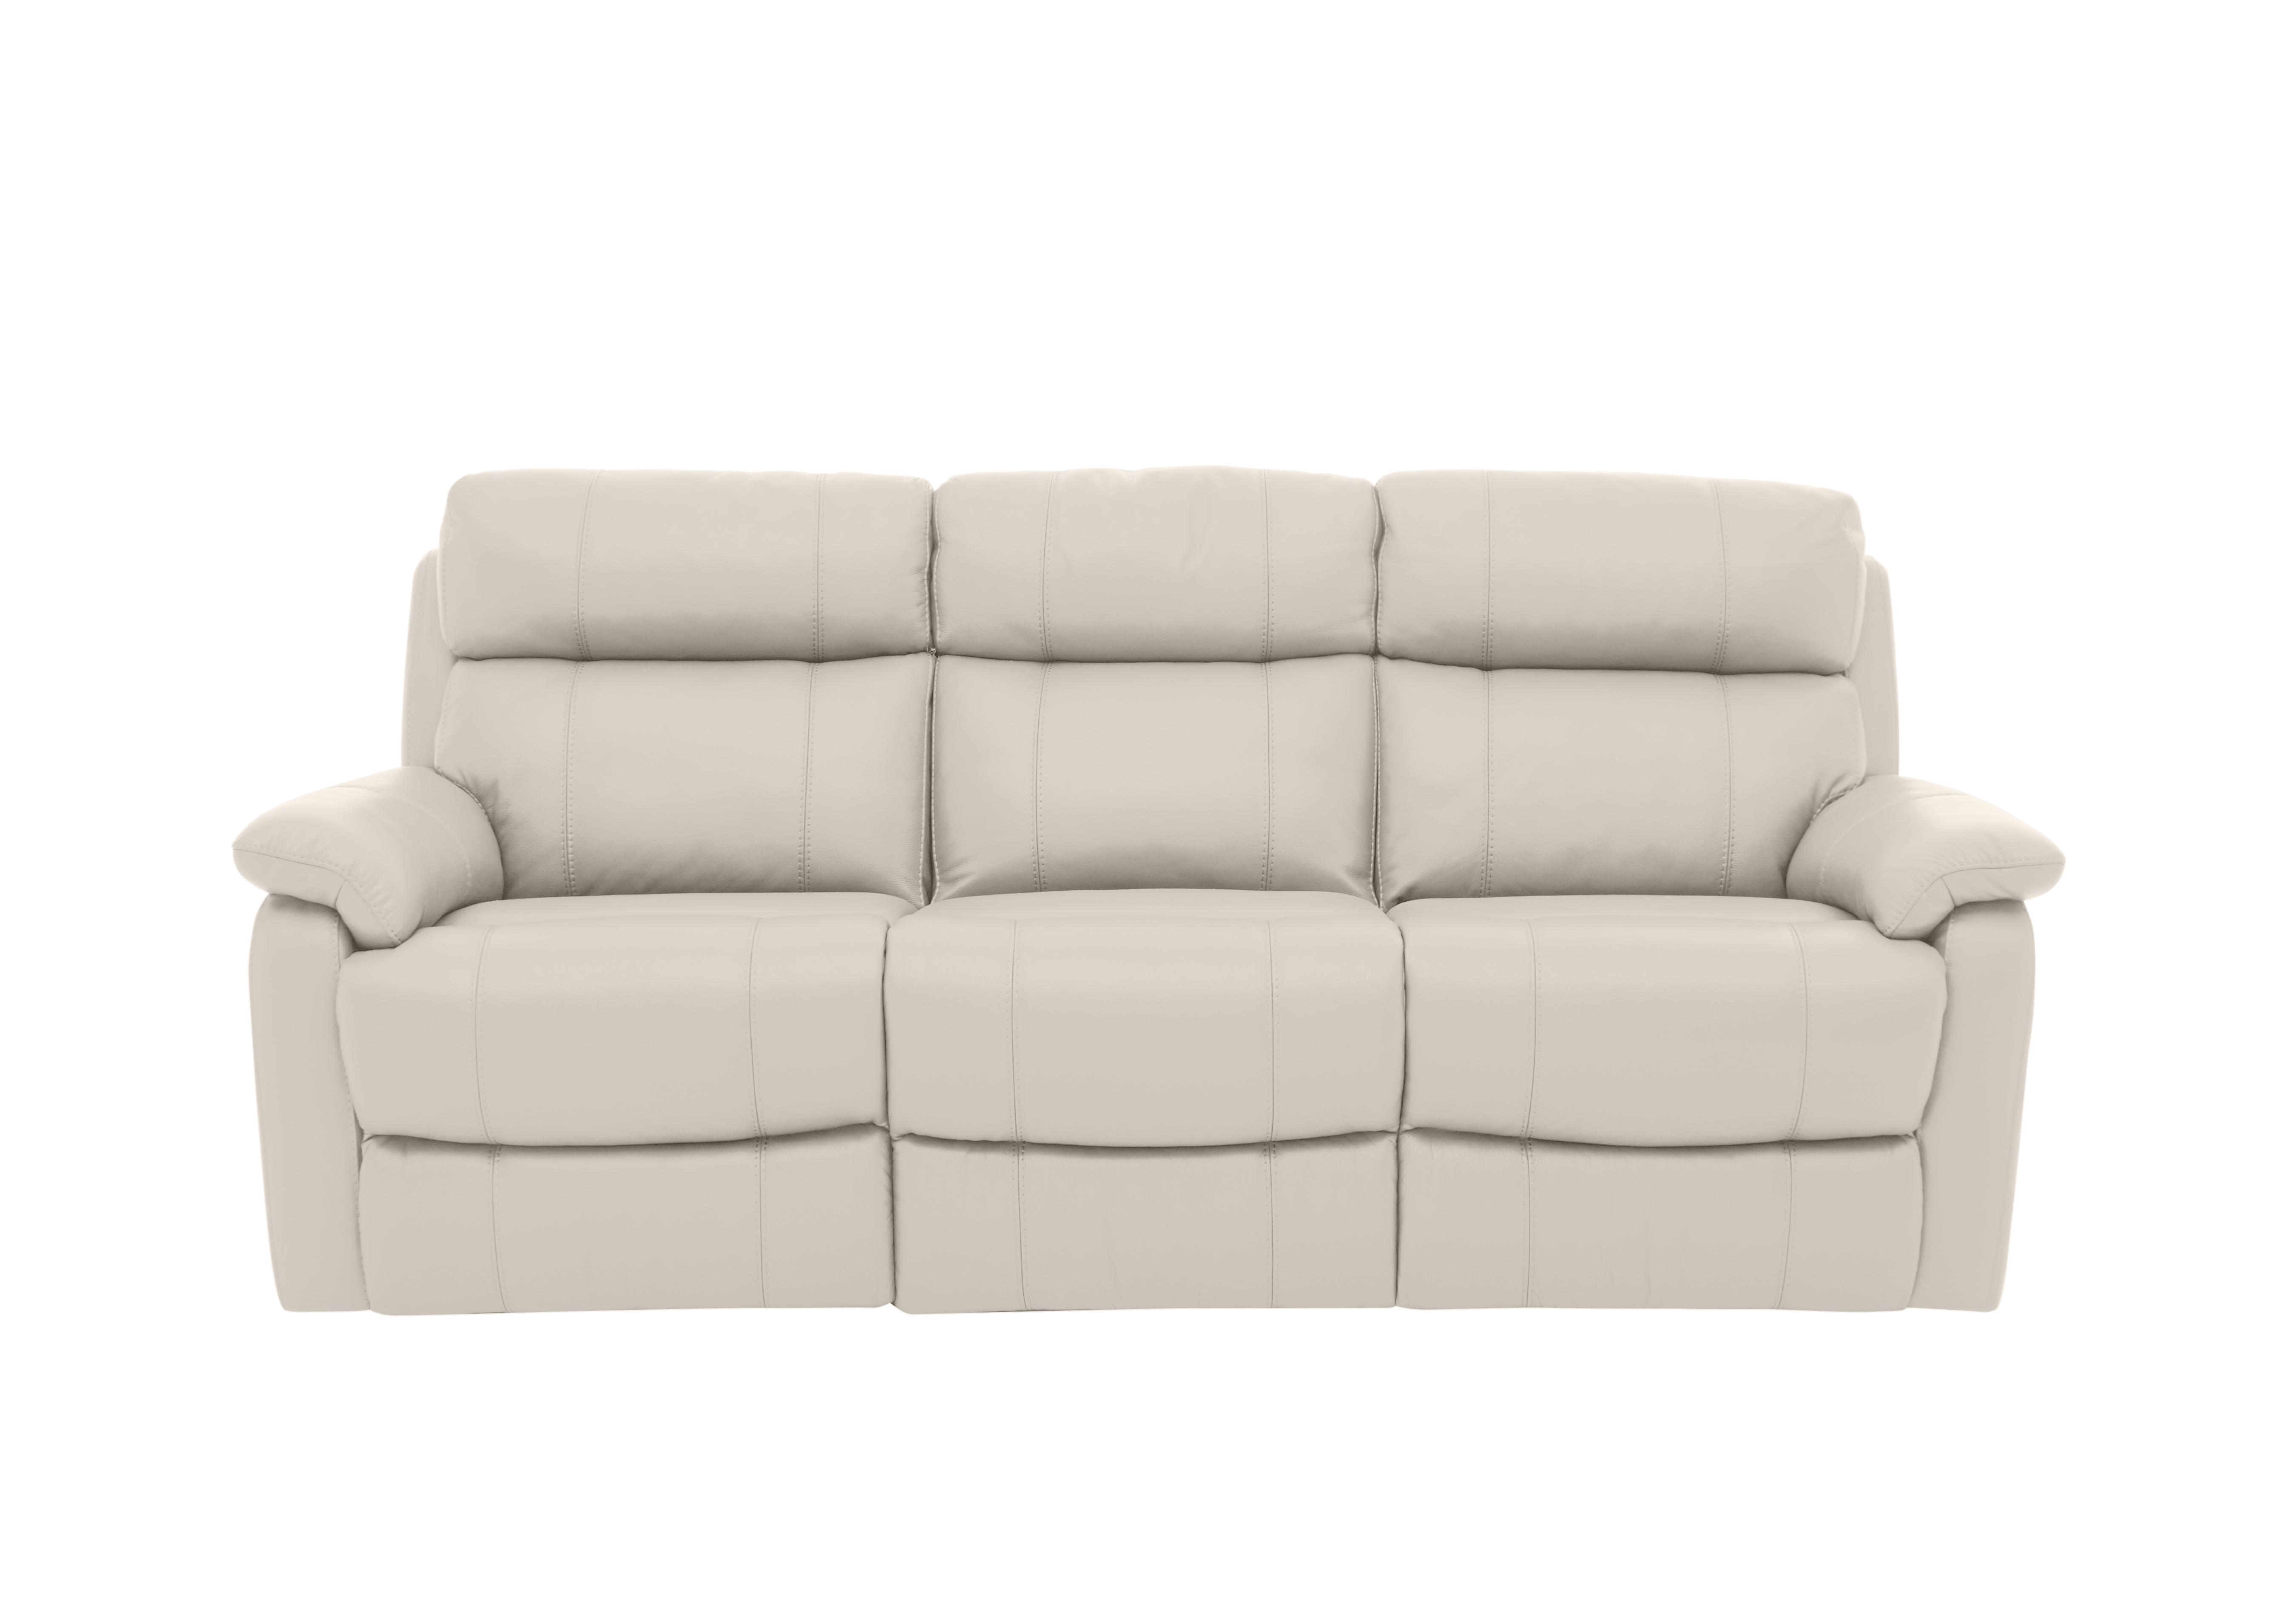 Relax Station Komodo 3 Seater Leather Sofa with Power Headrests and Cup Holders in Bv-156e Frost on Furniture Village